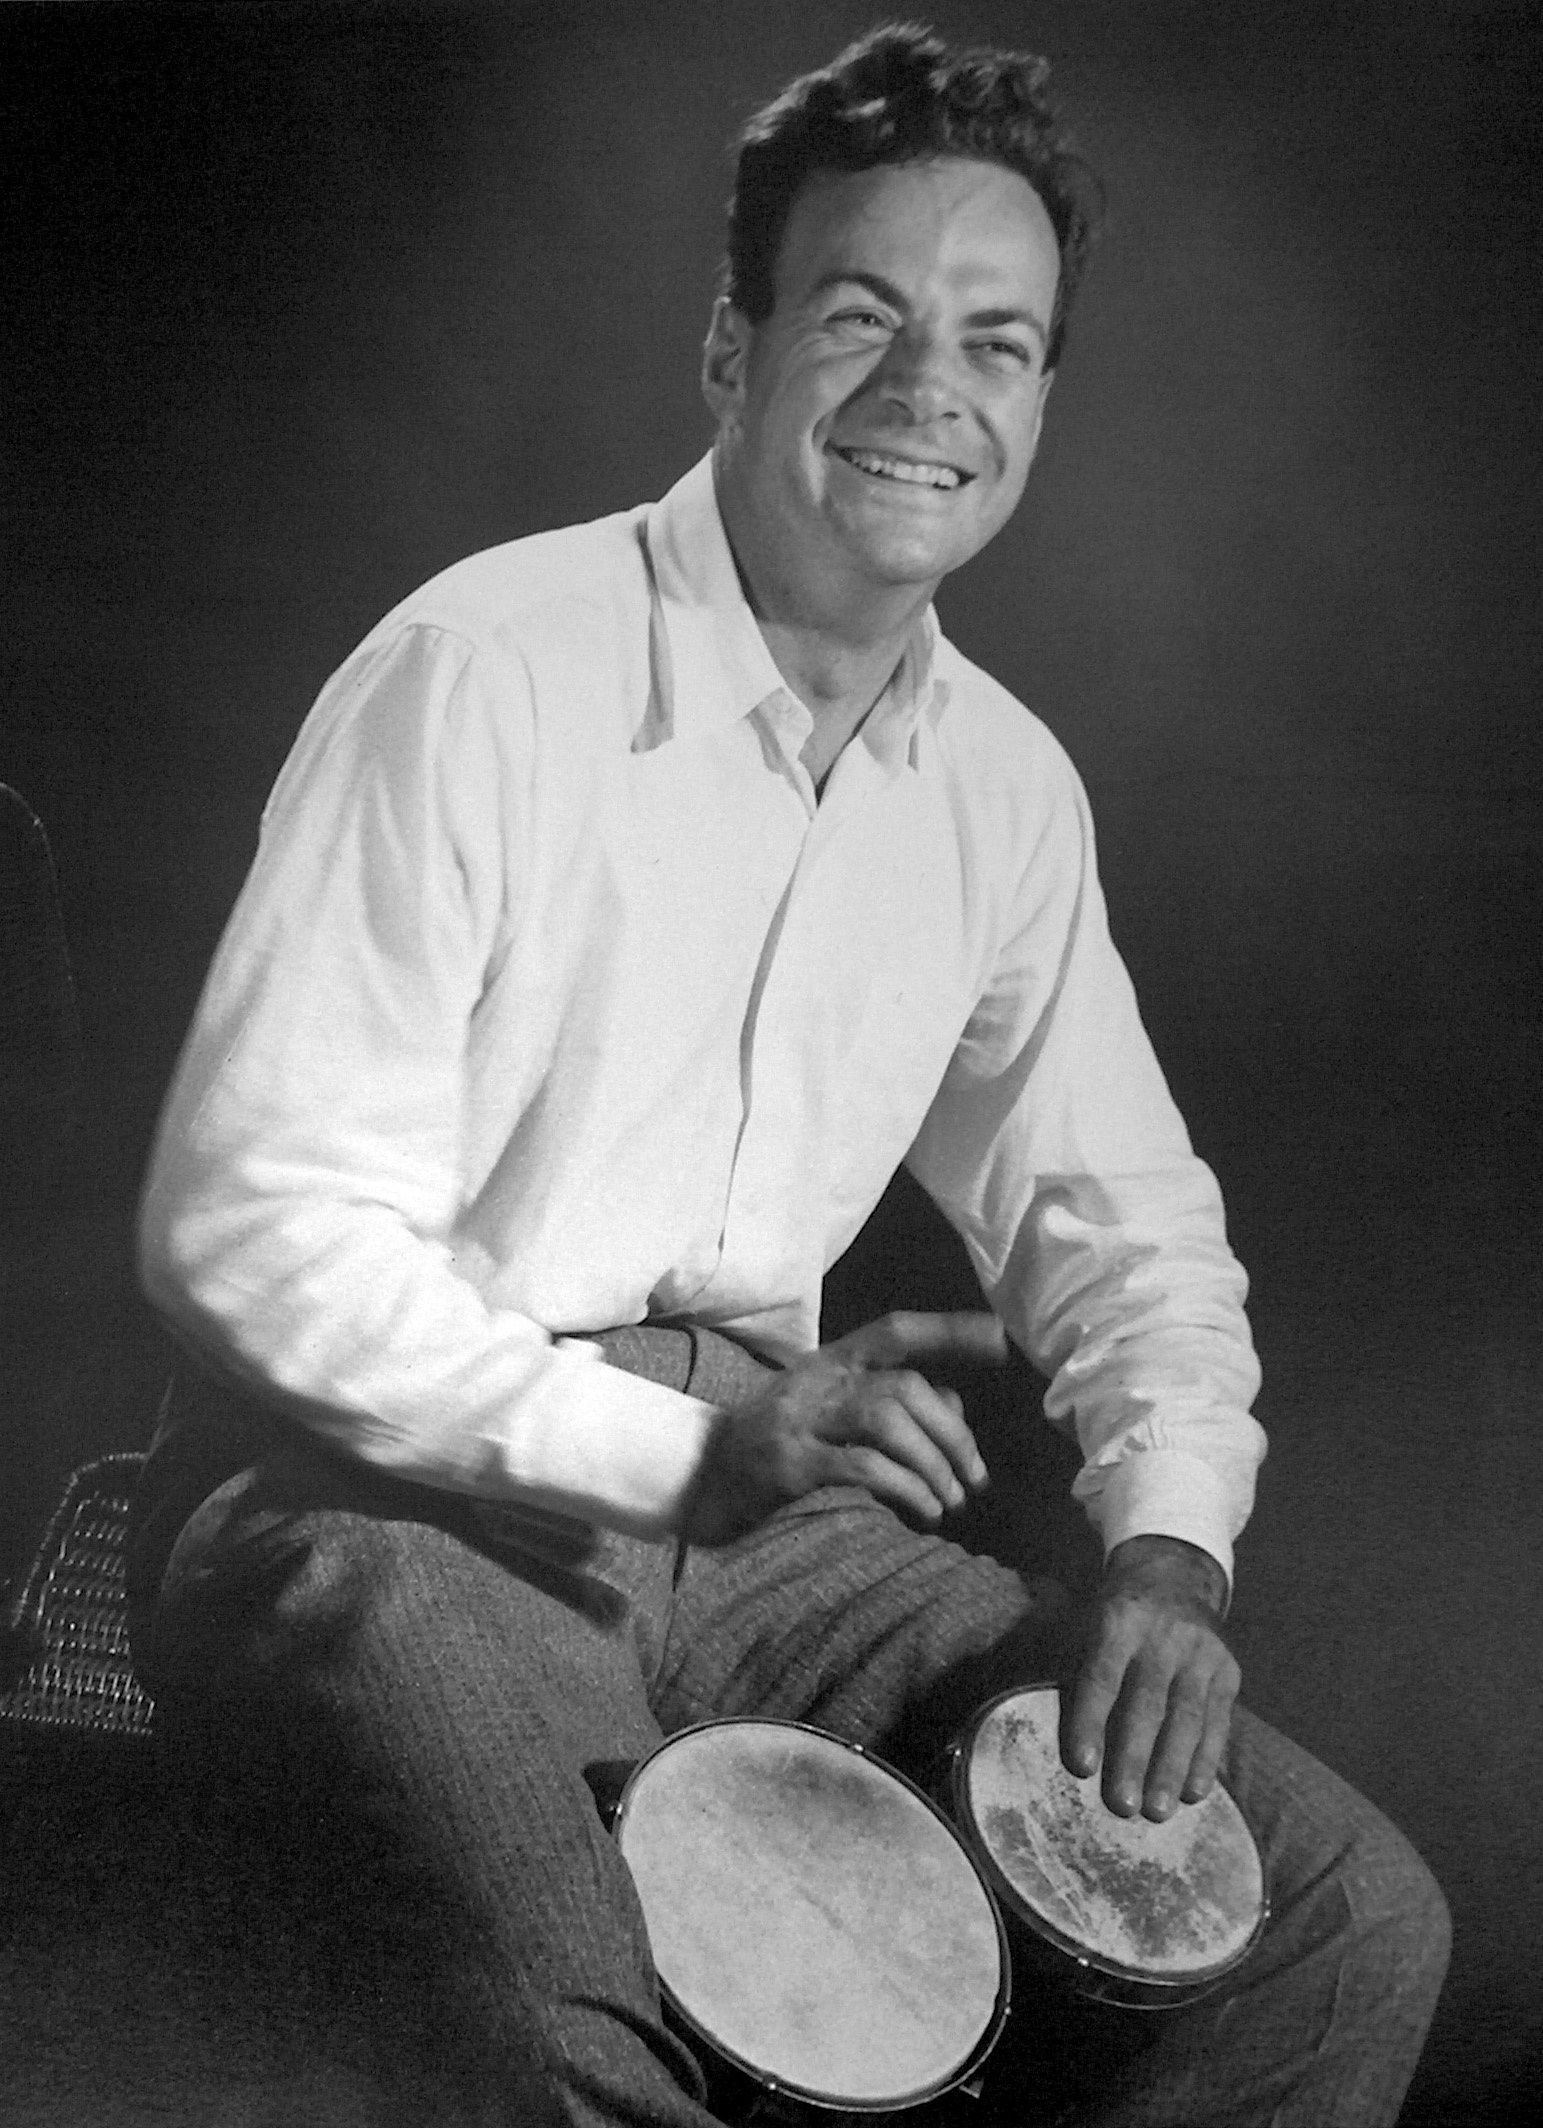 What is the most iconic photo of Richard Feynman?